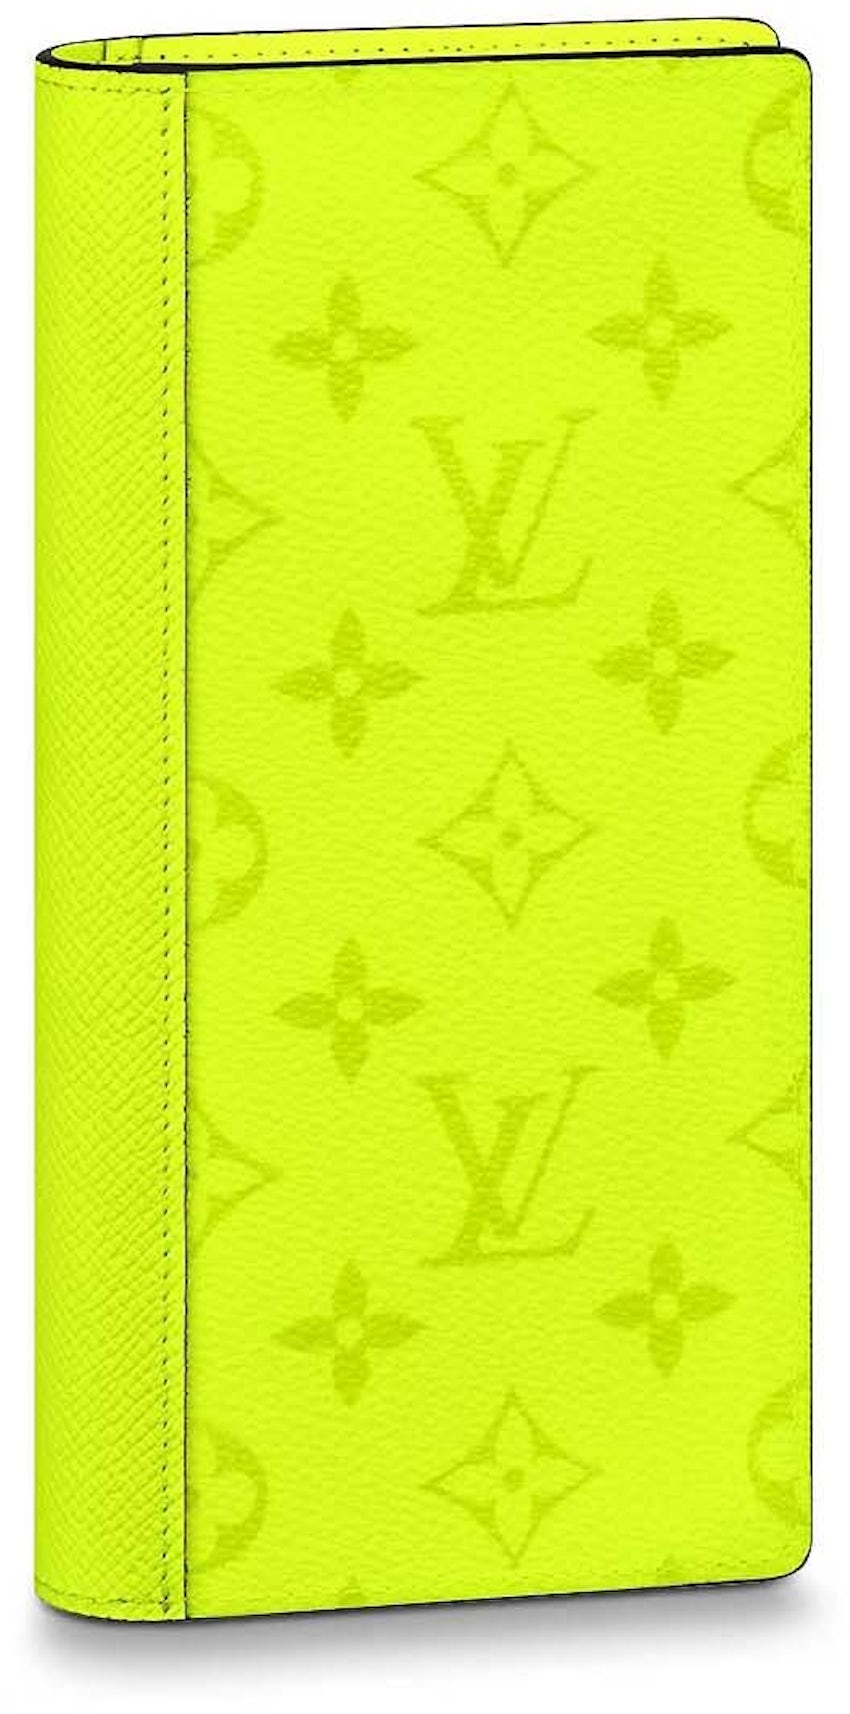 Louis Vuitton Brazza Wallet Neon Yellow in Monogram Coated Canvas/Taiga  Cowhide Leather - US